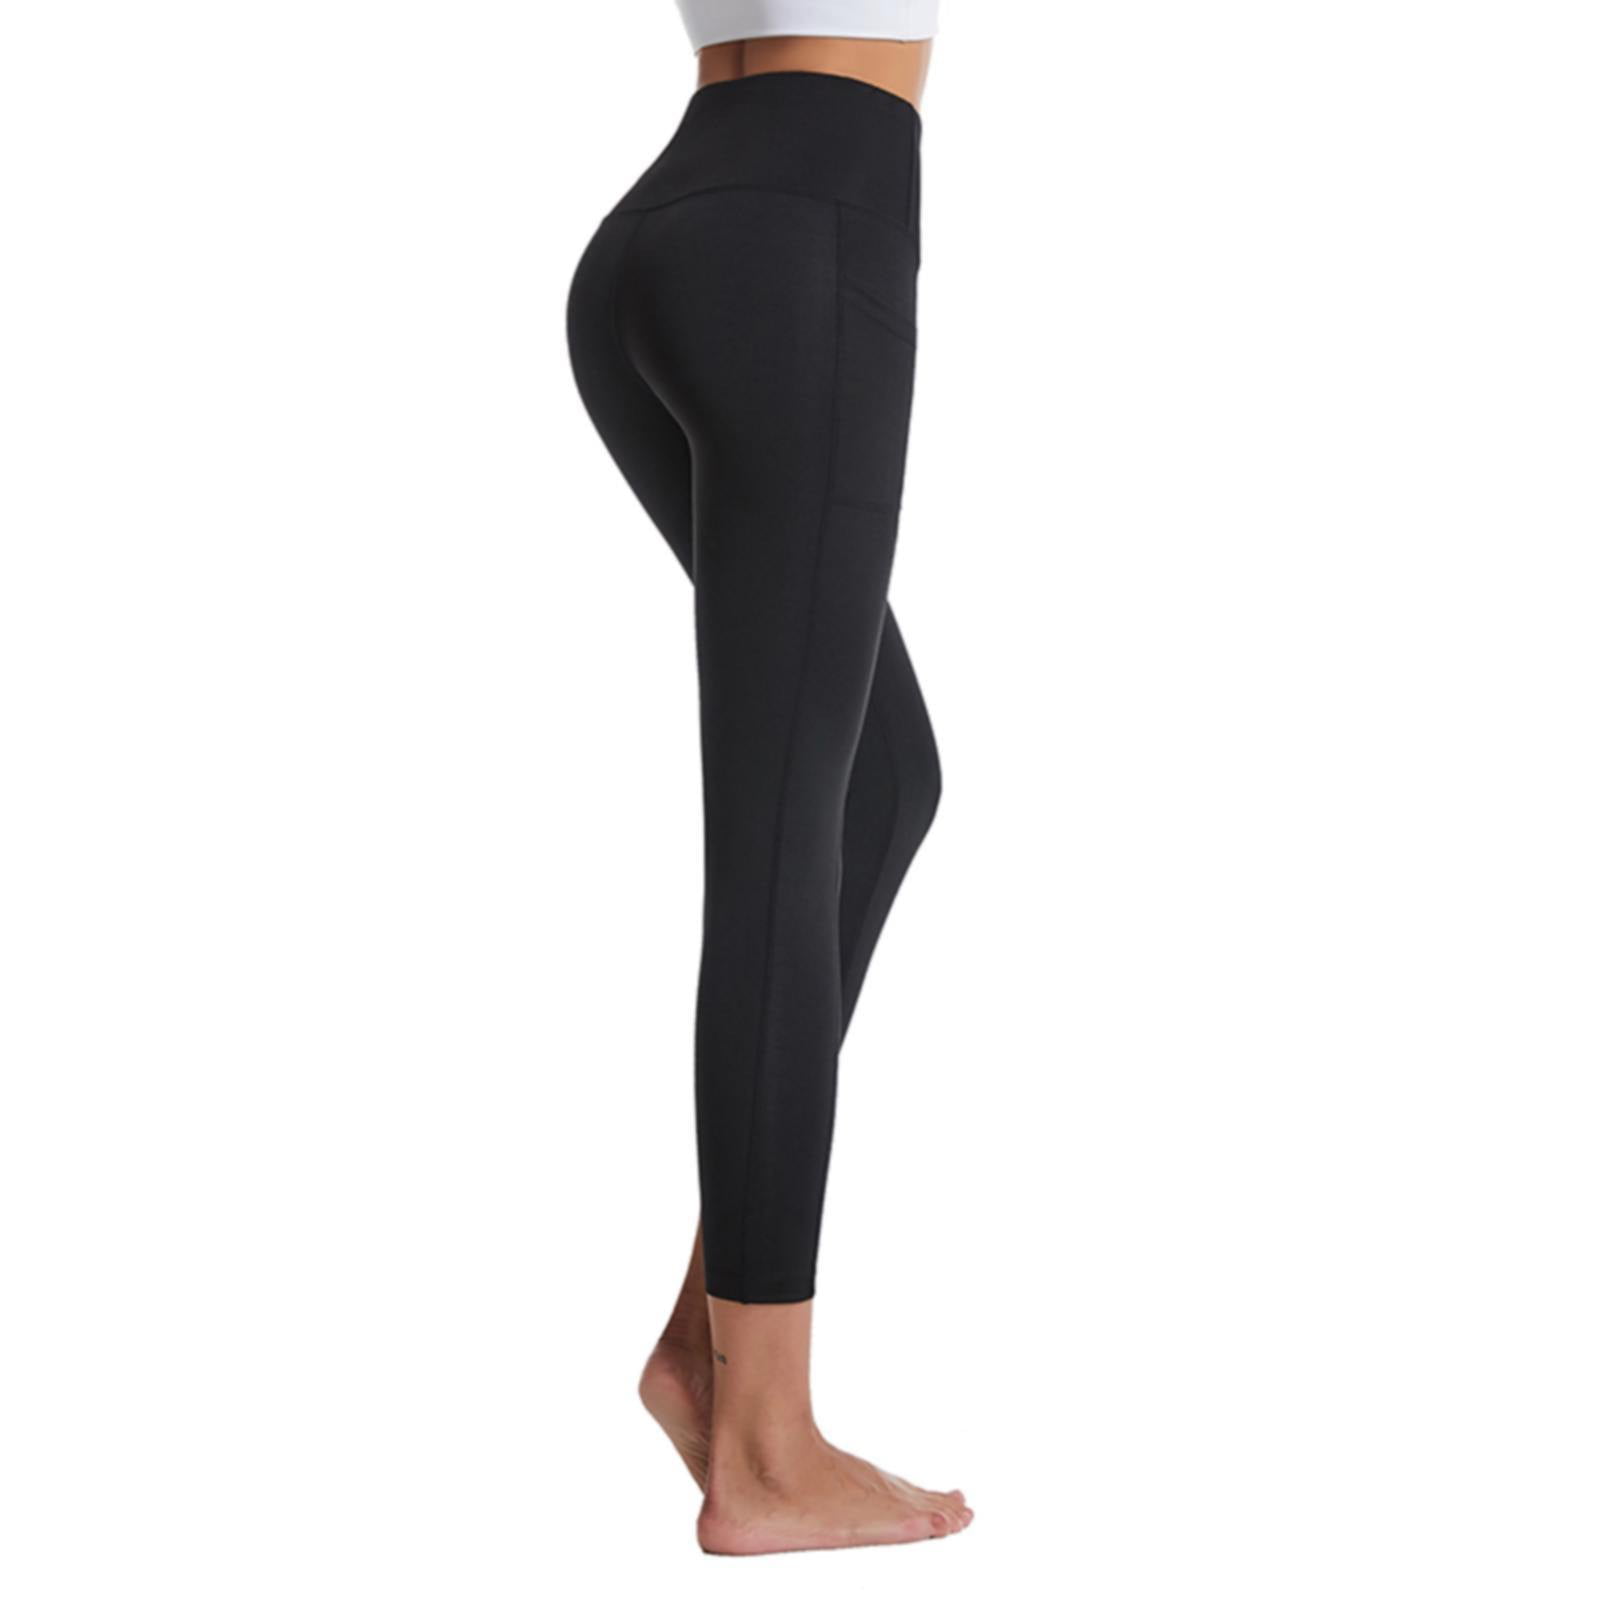 Plus Size Leggings With Pockets Lifting Fitness Compression Pants Black XL